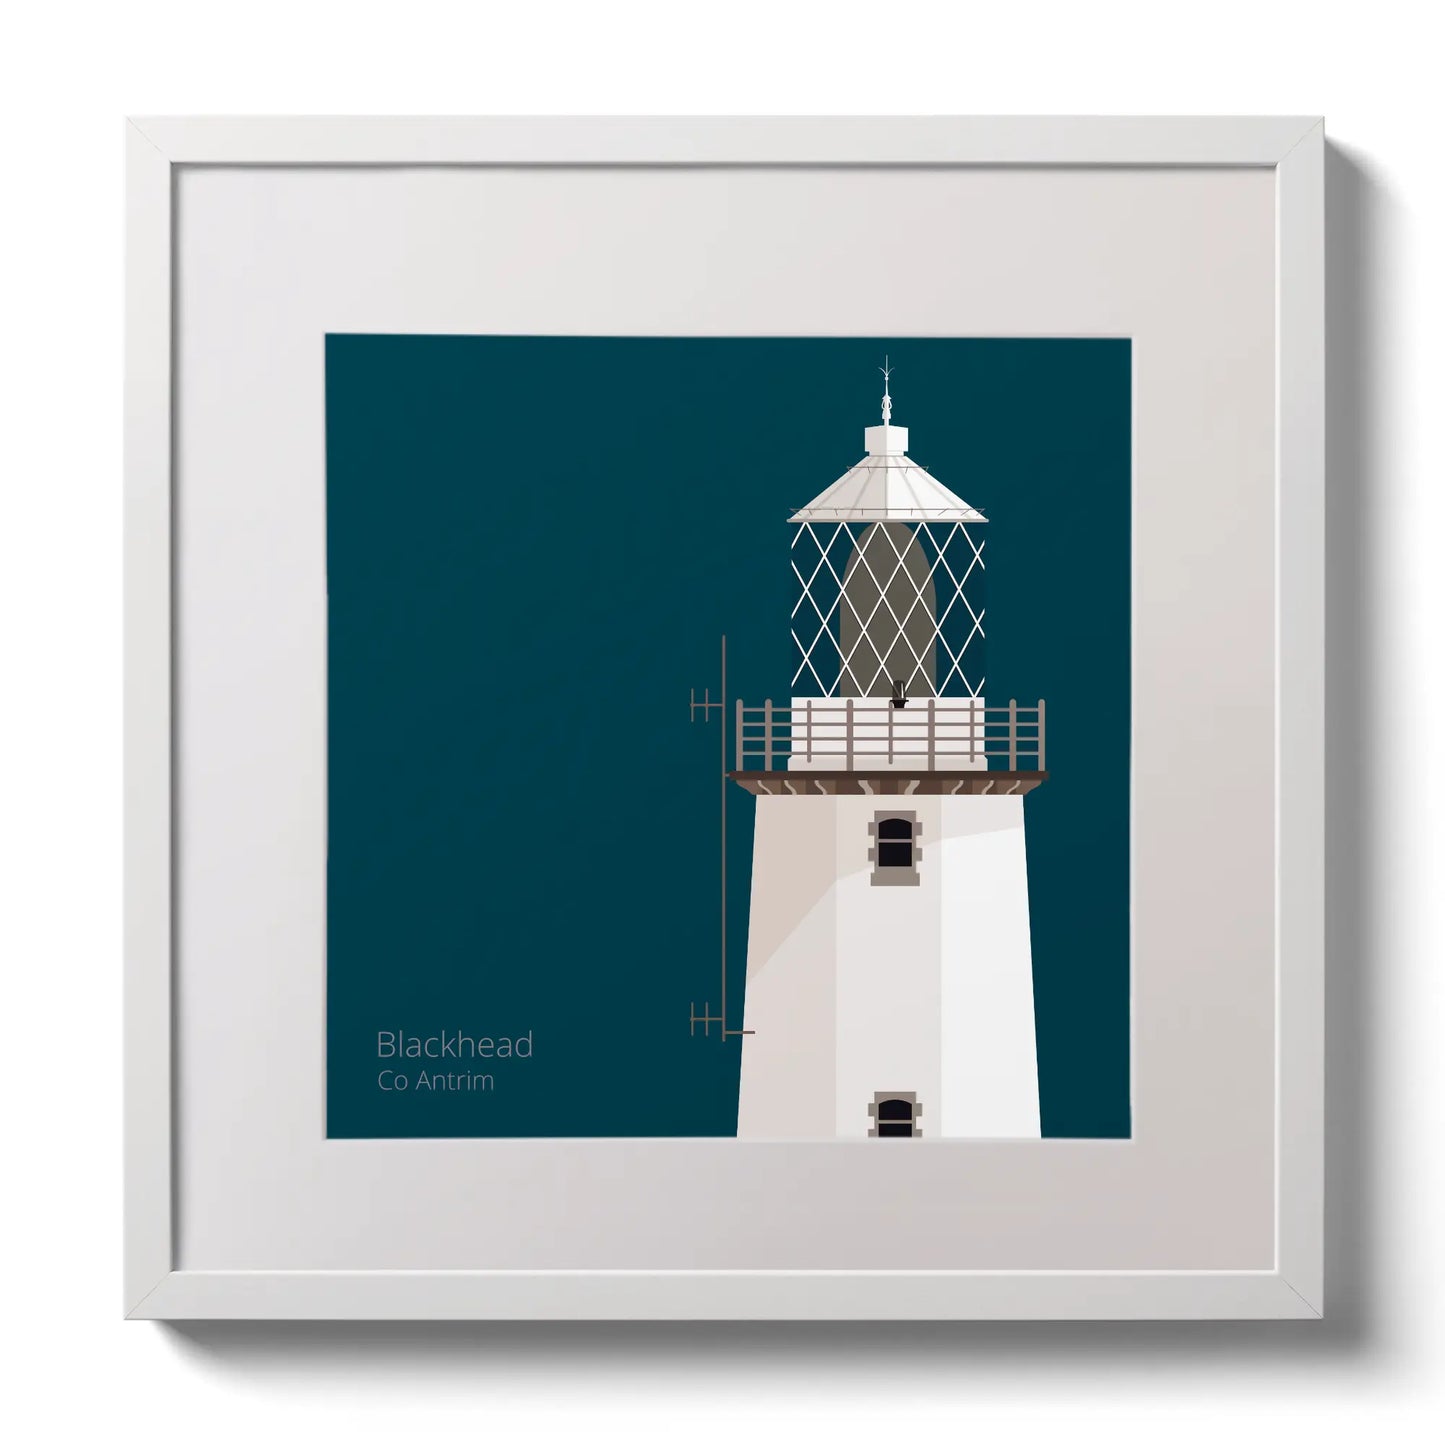 Illustration of Blackhead lighthouse on a midnight blue background,  in a white square frame measuring 30x30cm.